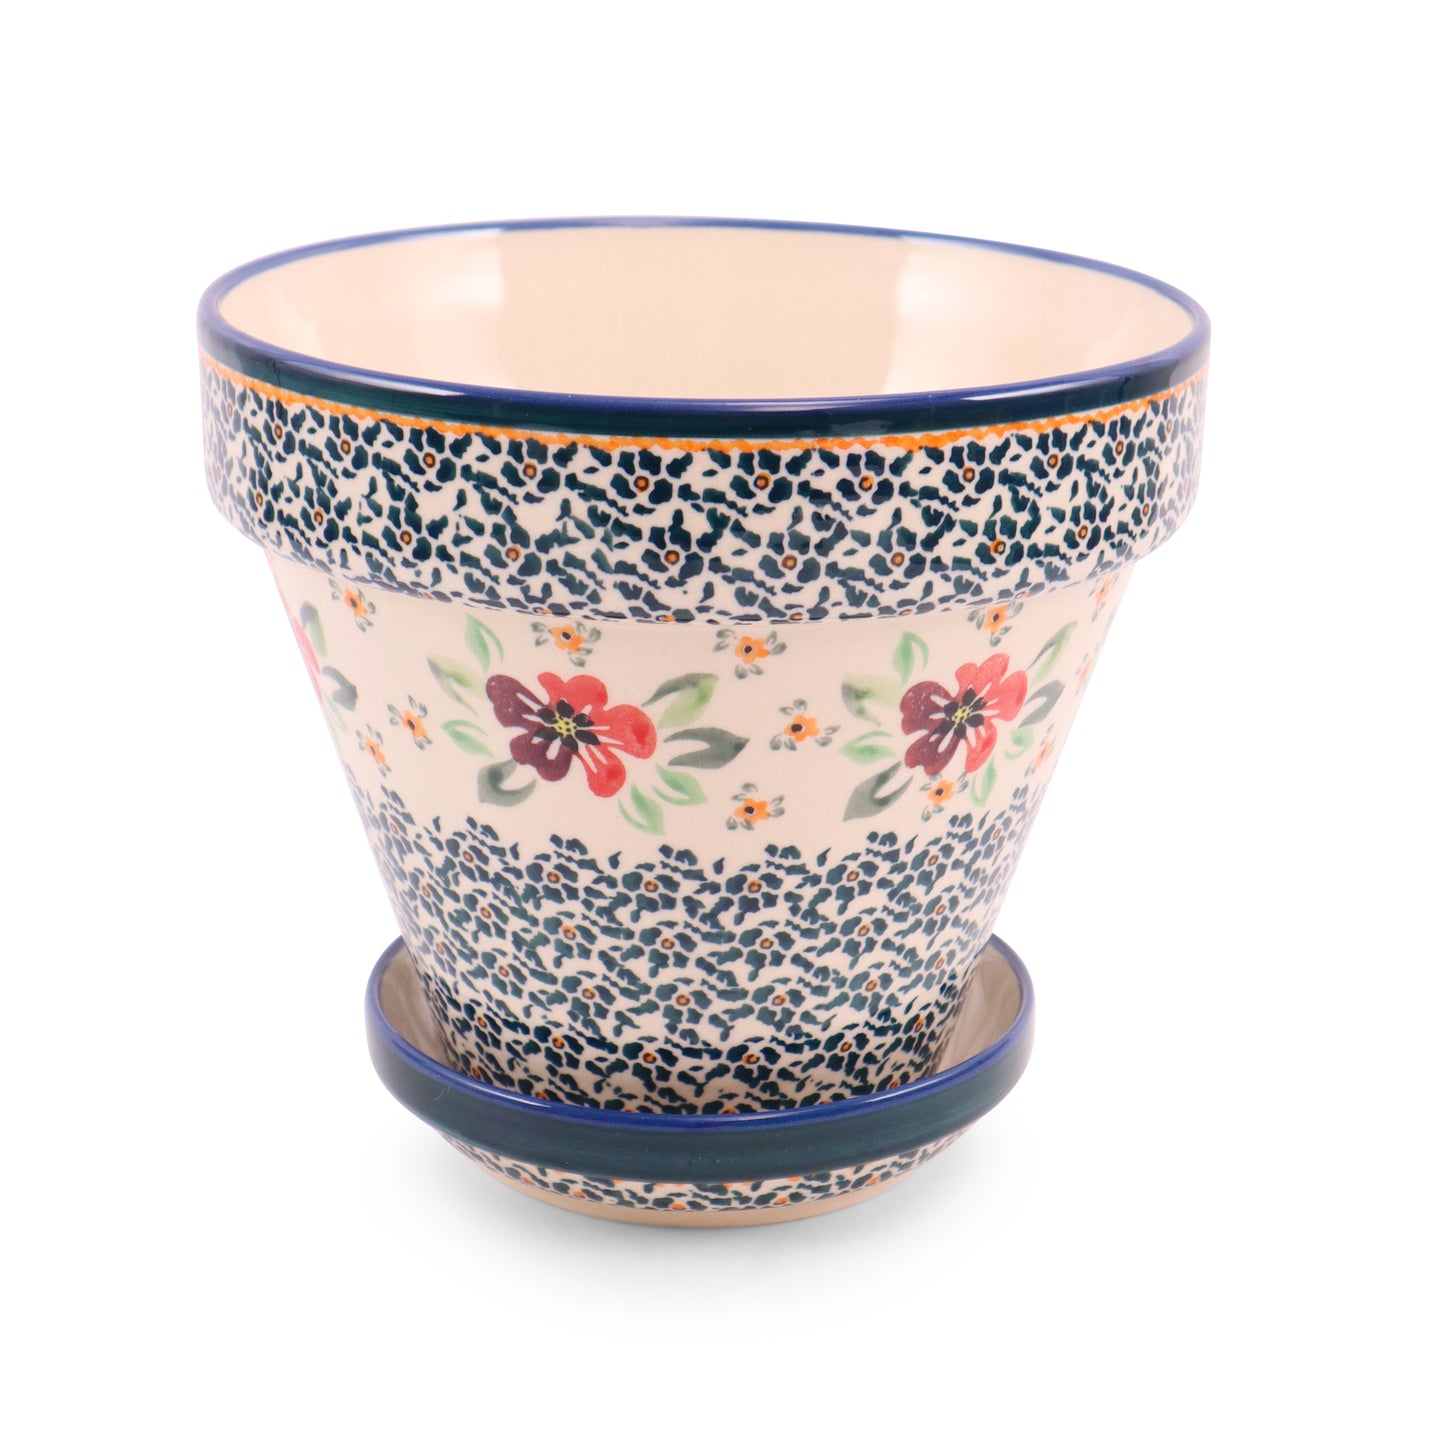 7.5"x6.5" Flower Pot with Tray. Pattern: Red Rover